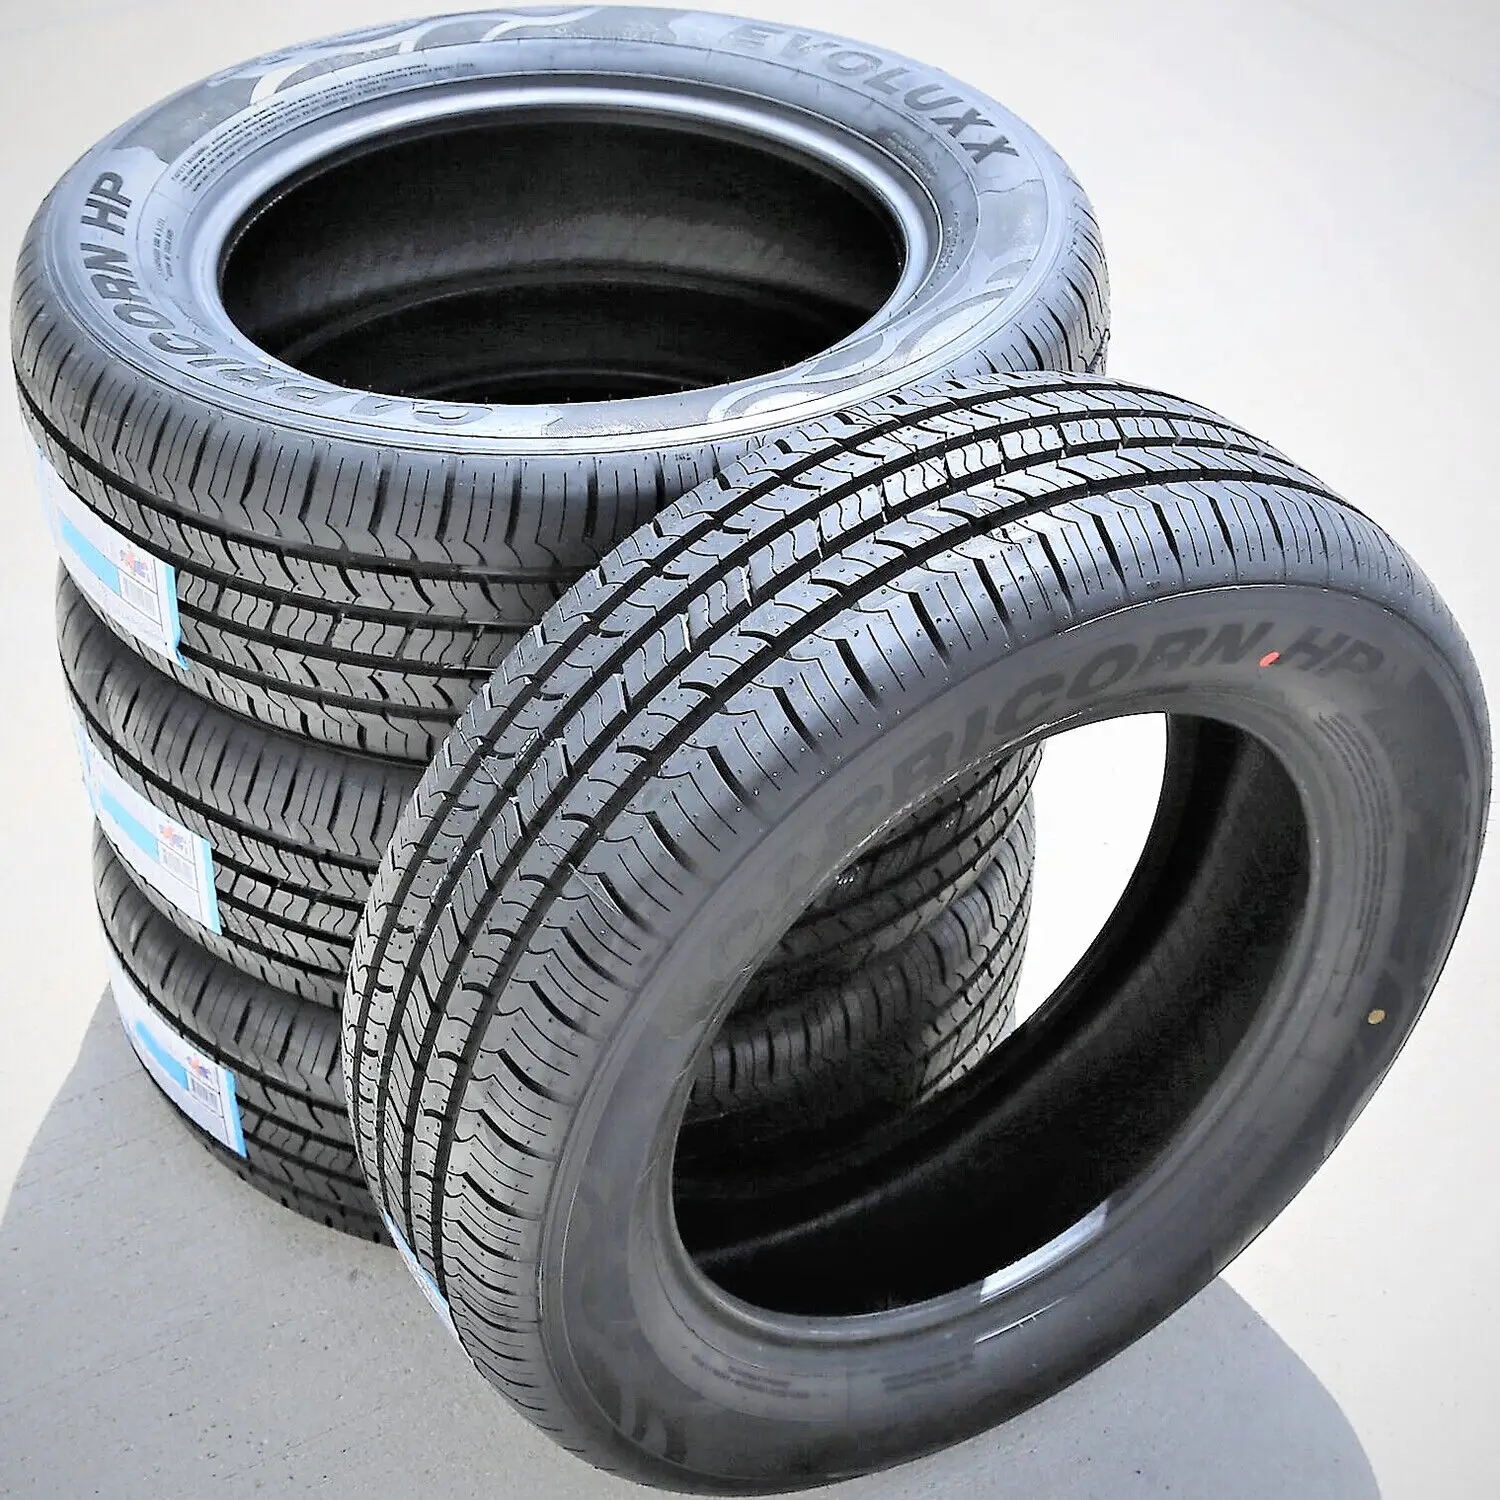 Quality Used Car Tires for Sale/Best Grade Car Tires For Export In Bulk, European all grade used tires for sale